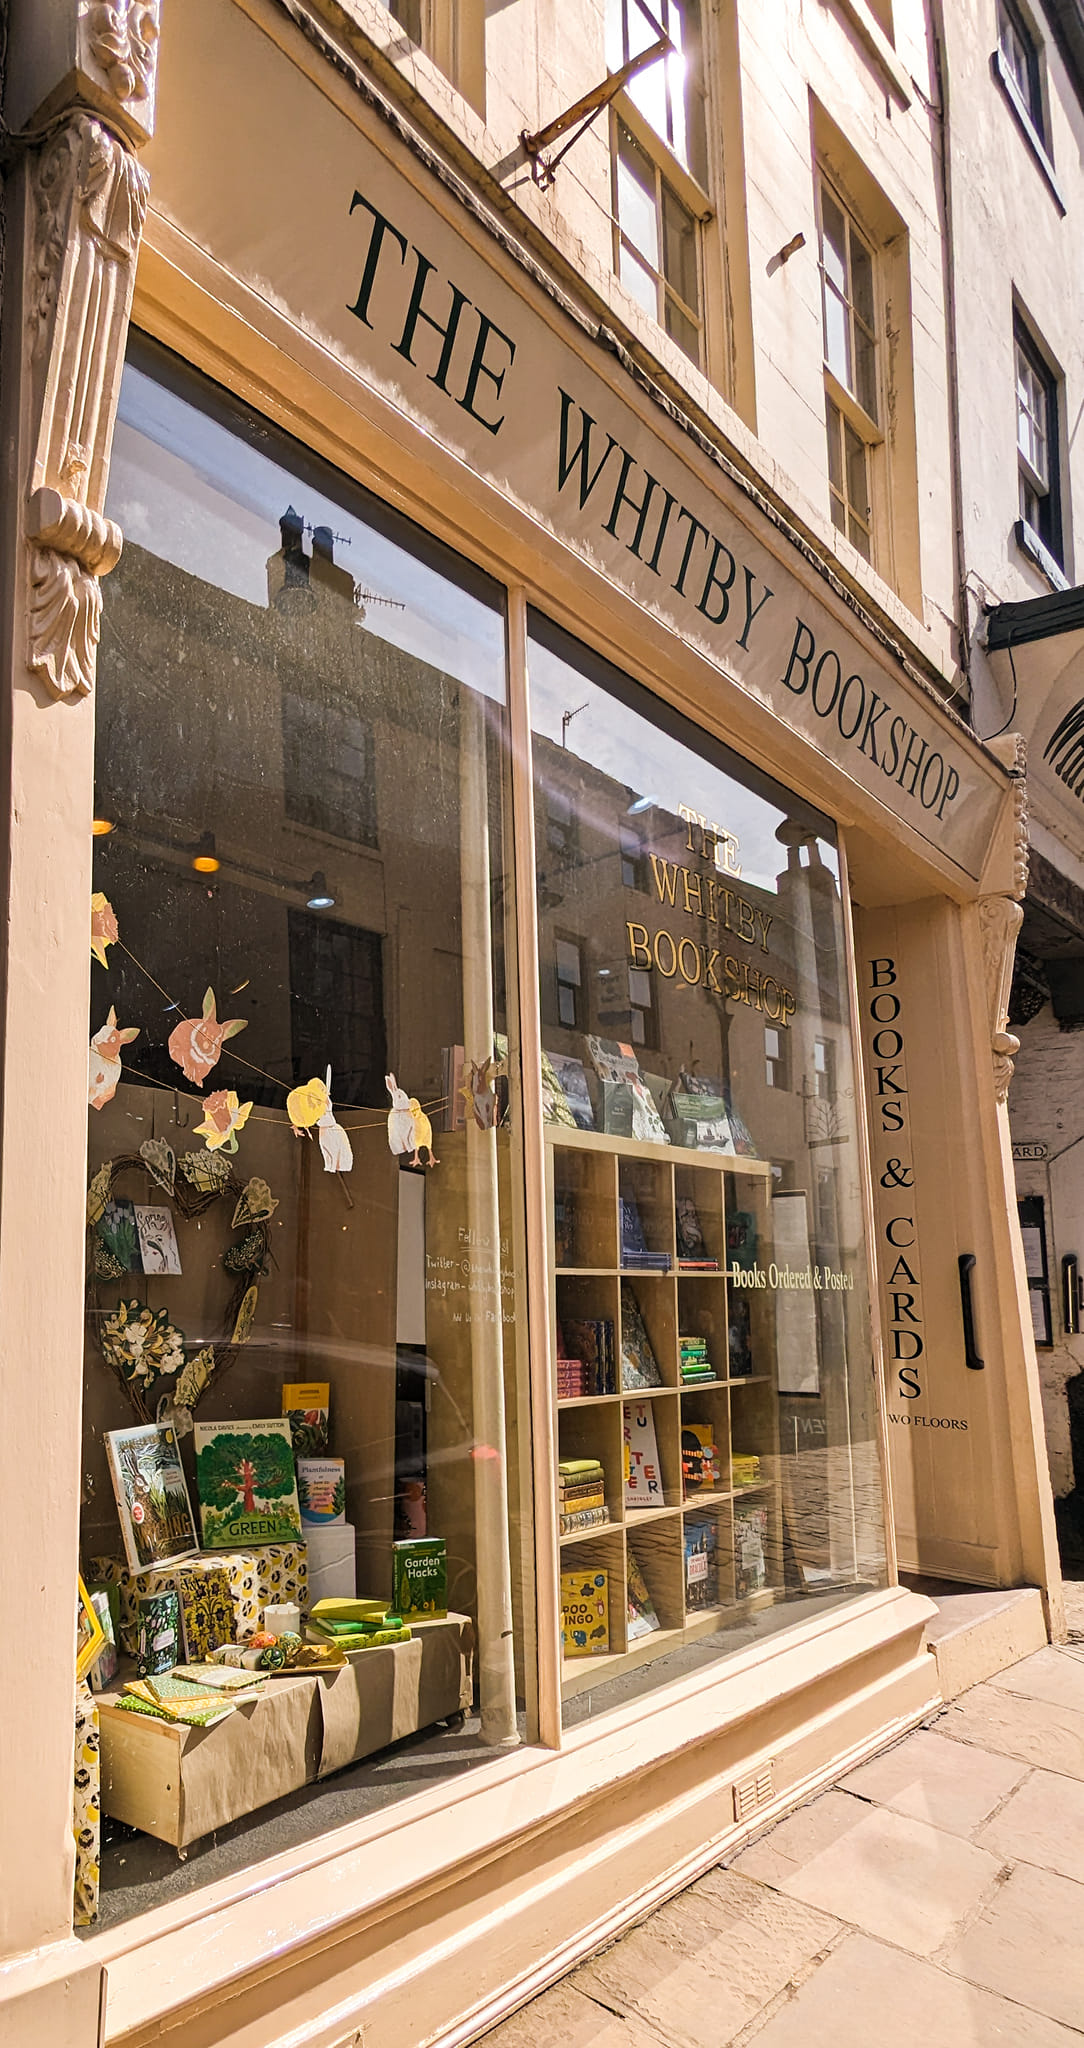 The Whitby Bookshop